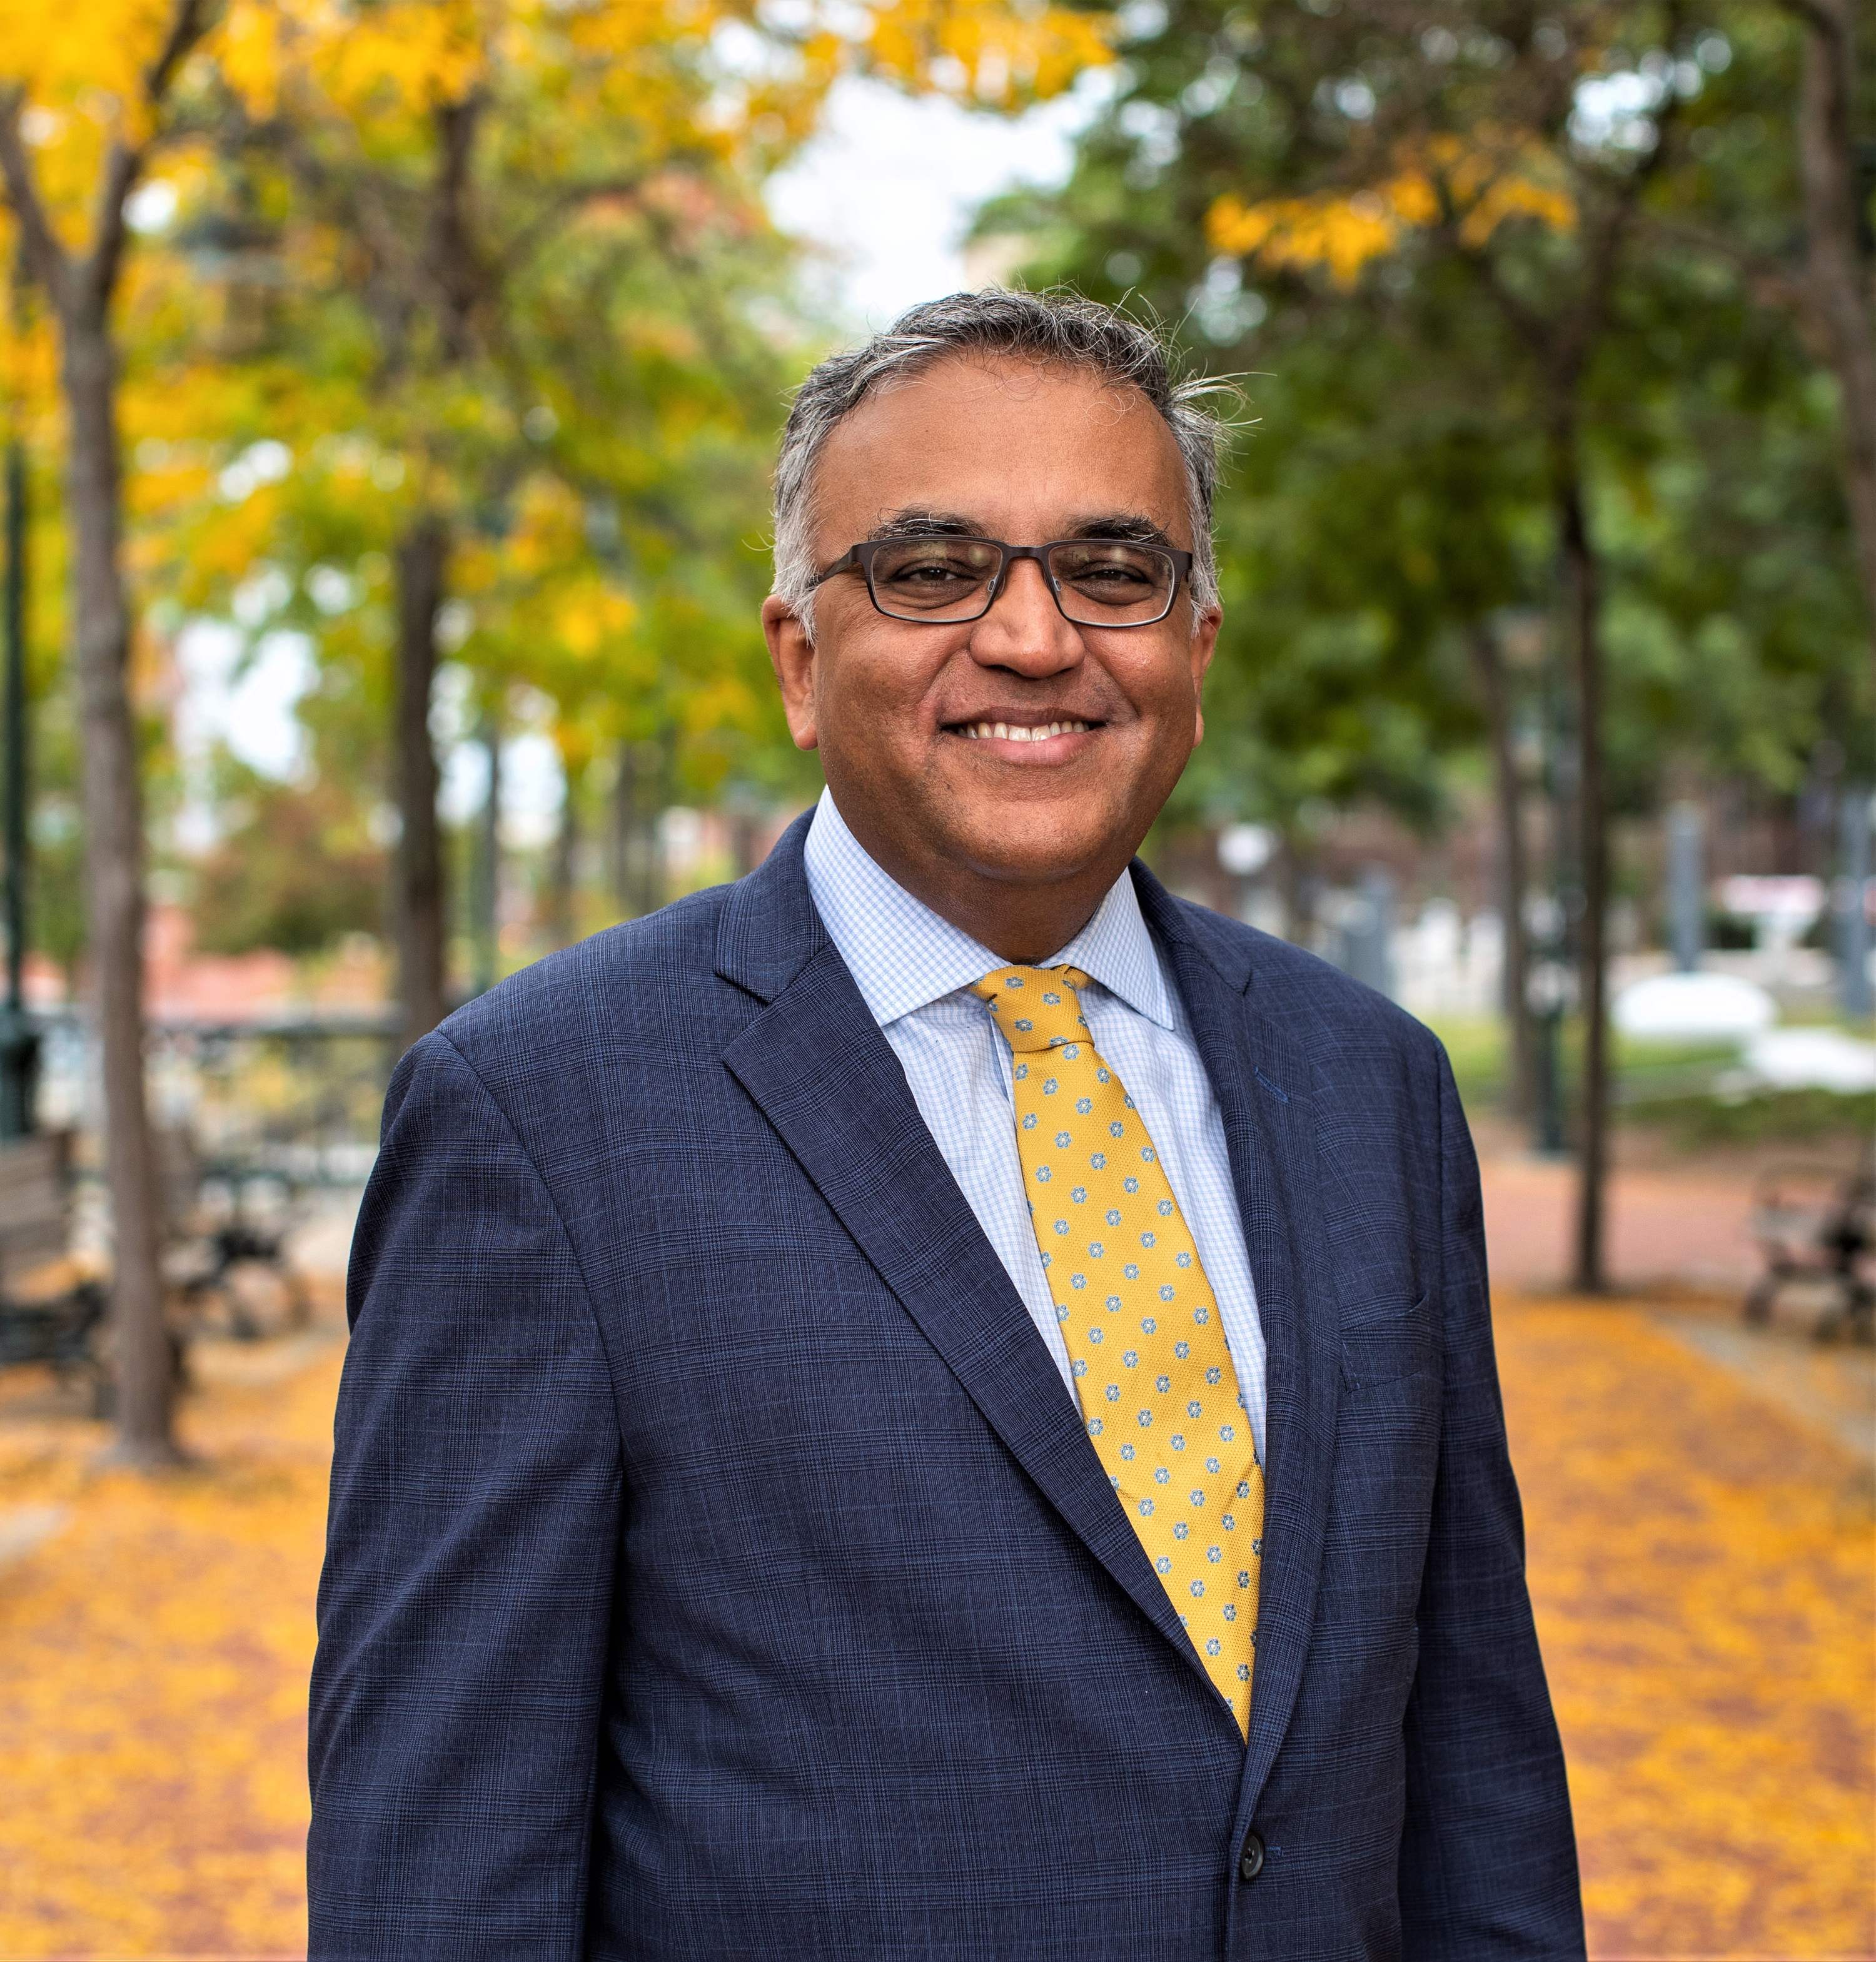 Welcome to Episode 41 of “COVID: What comes next,” an exclusive weekly Providence Journal/USA TODAY NETWORK podcast featuring Dr. Ashish Jha, dean of the Brown University School of Public Health and an internationally respected expert on pandemic response and preparedness